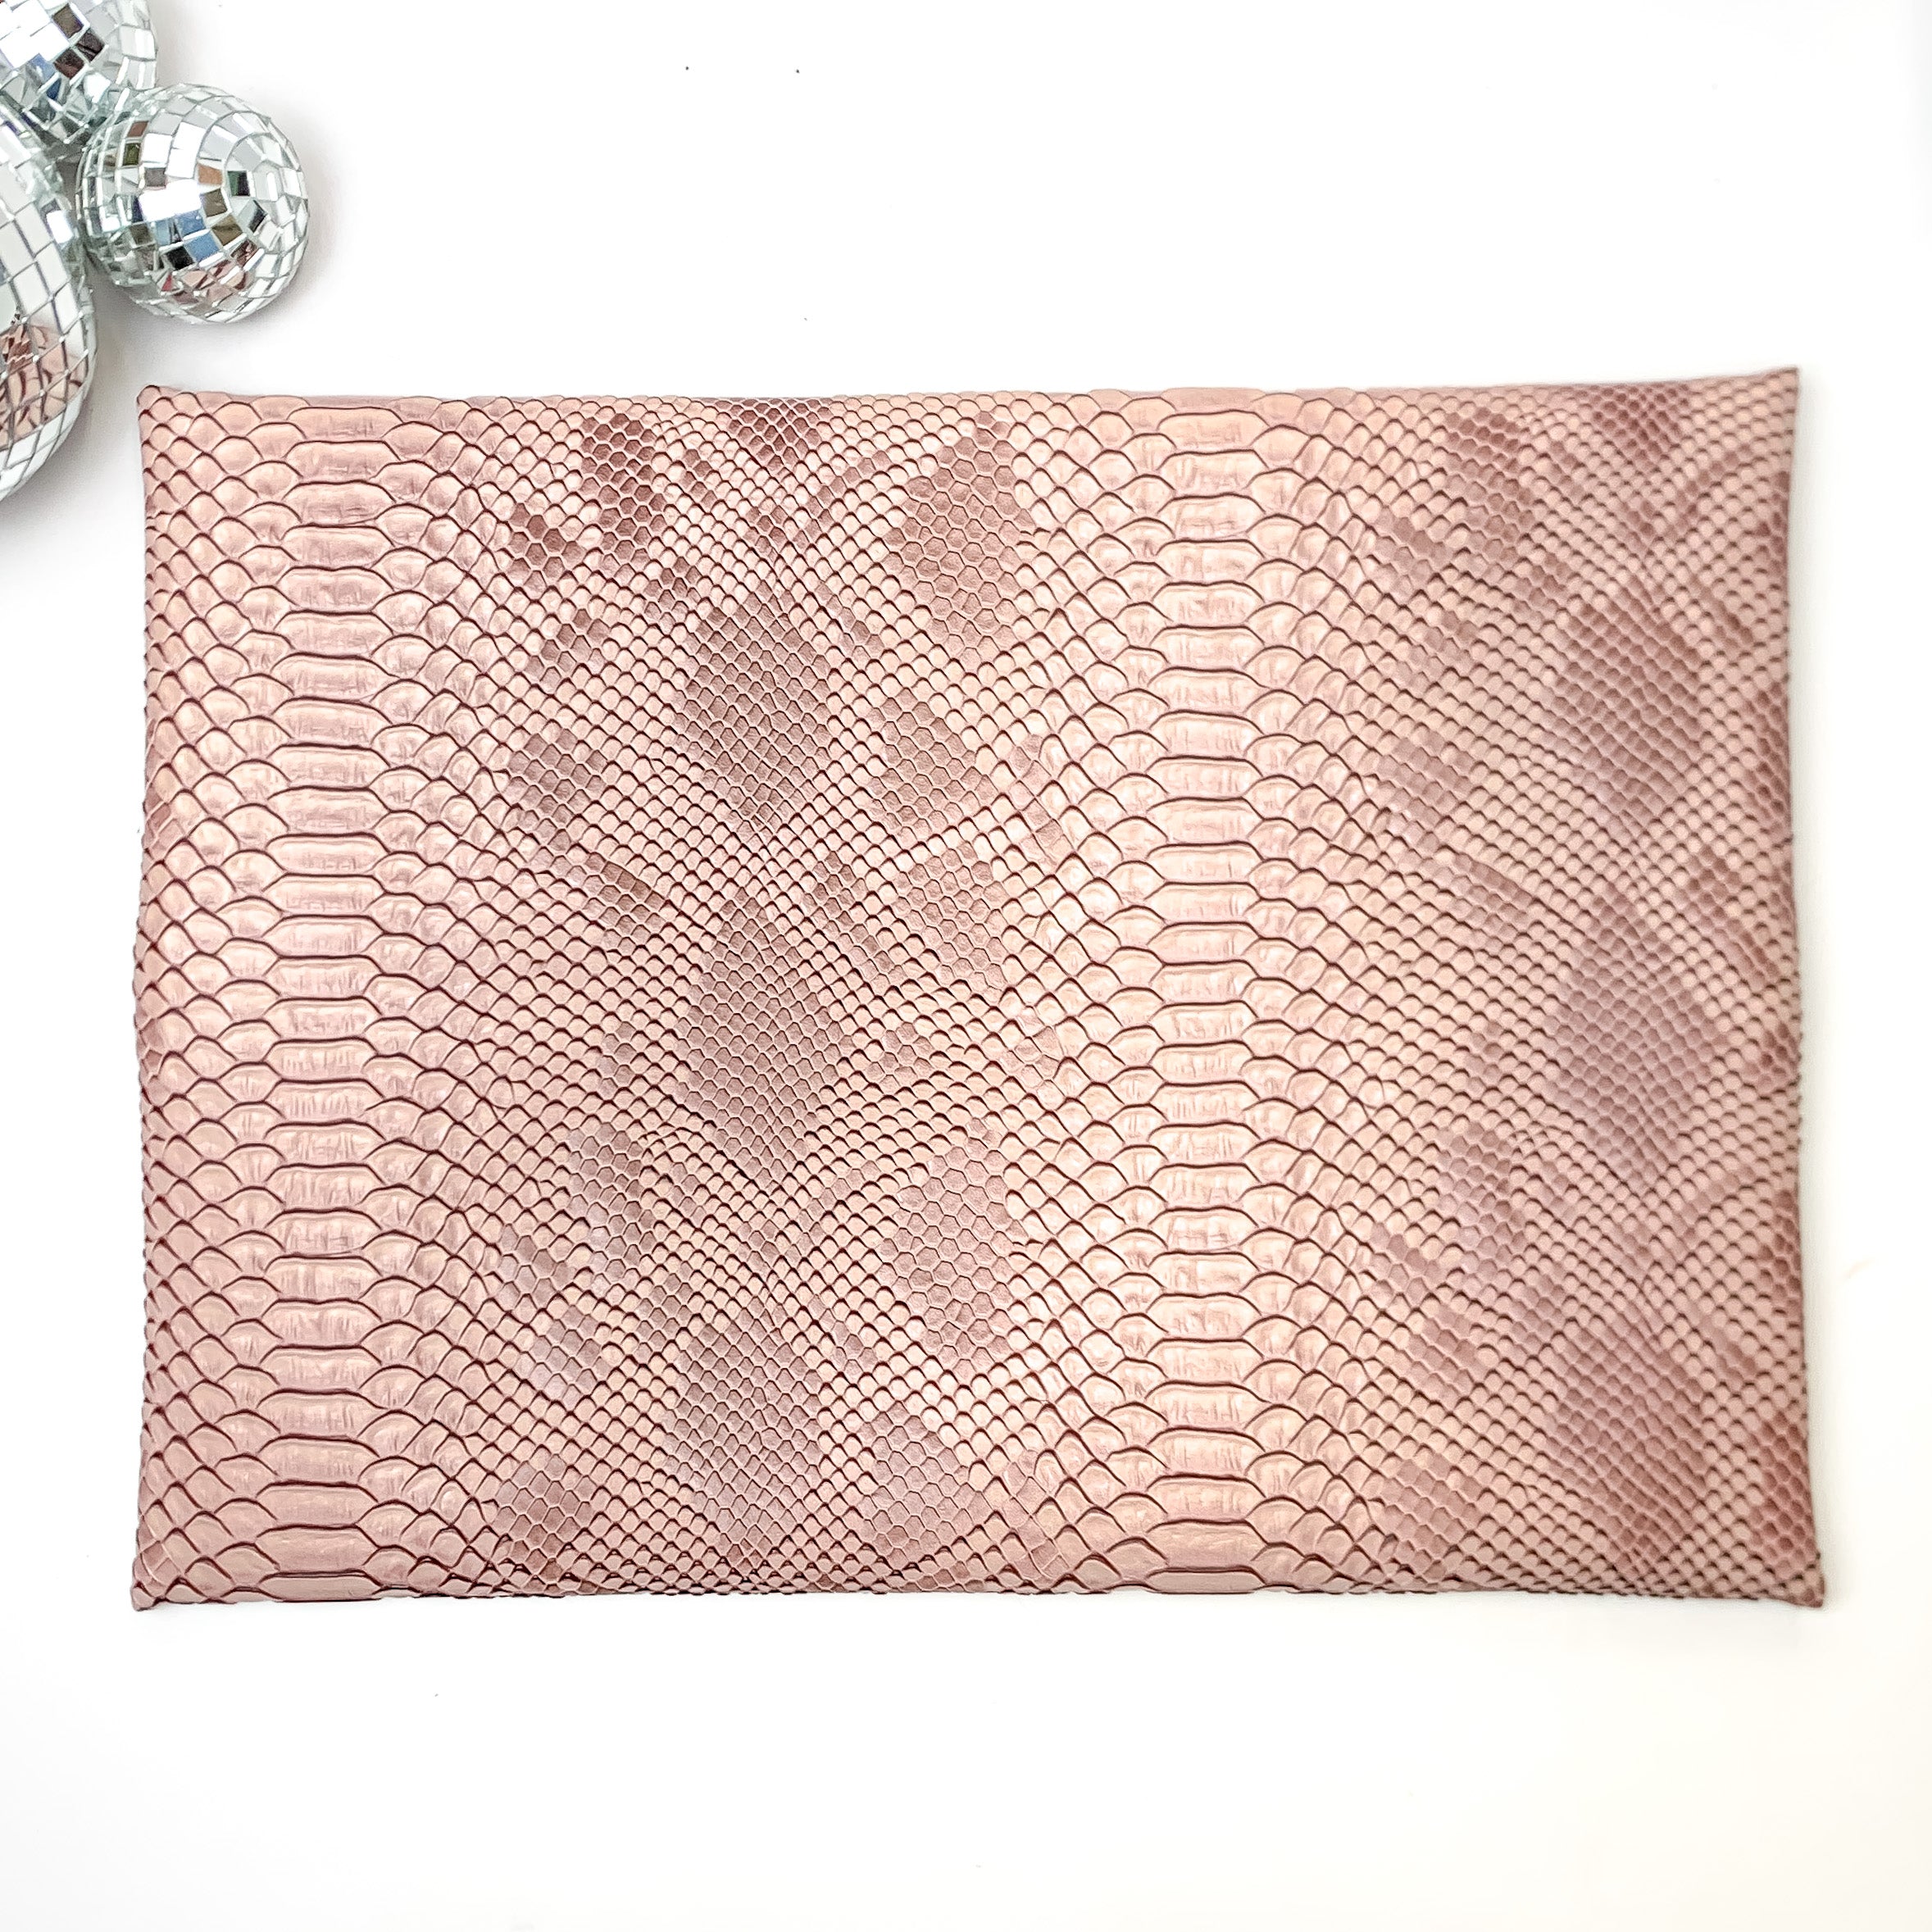 Makeup Junkie | Large Copperazzi Lay Flat Bag in Dusty Pink Snake Print - Giddy Up Glamour Boutique